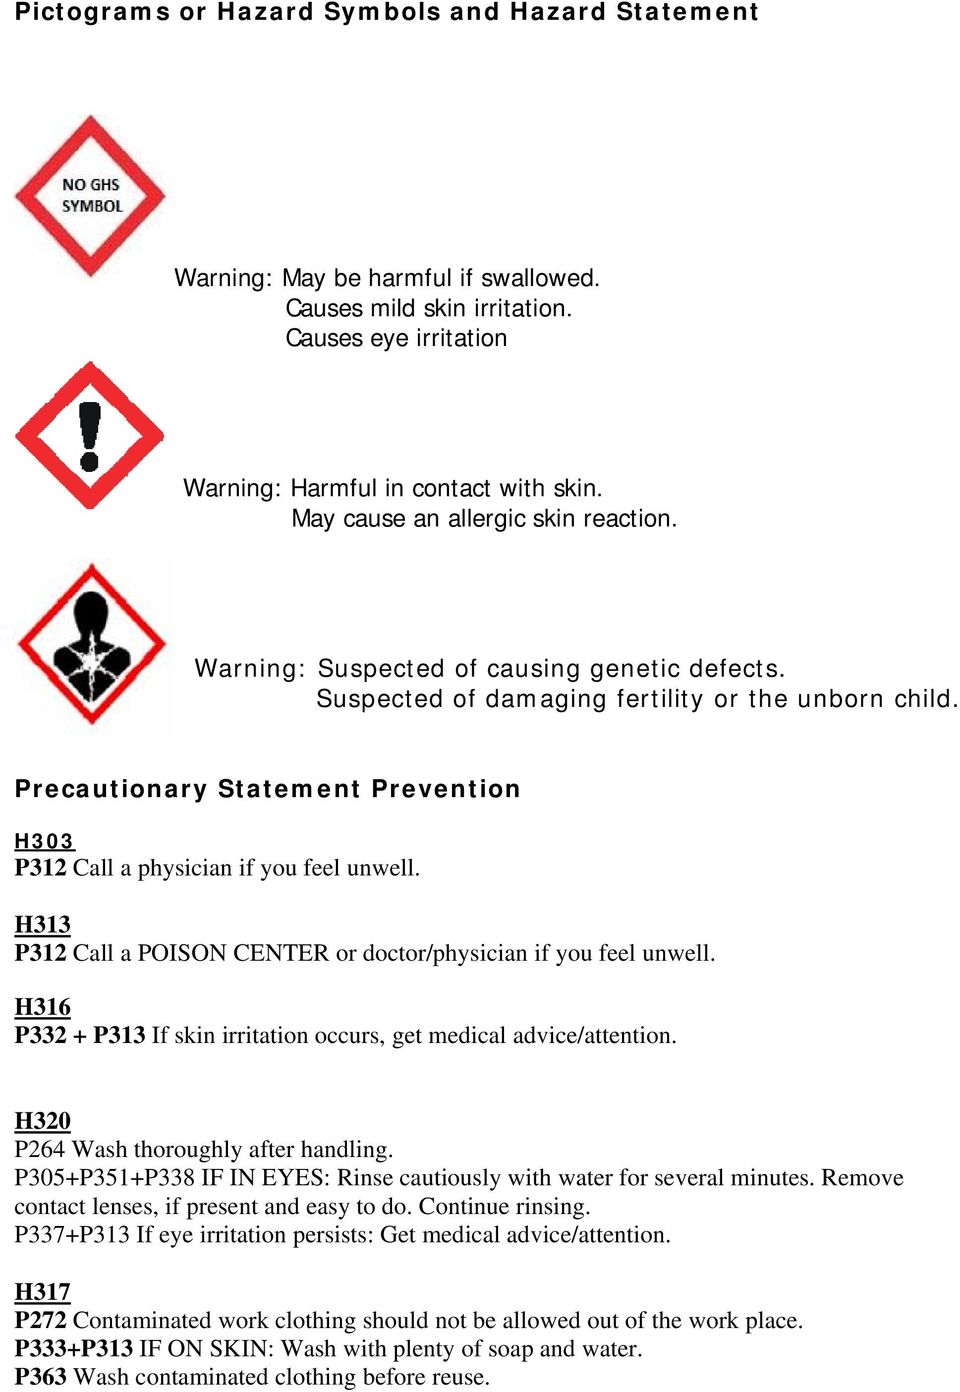 Precautionary Statement Prevention H303 P312 Call a physician if you feel unwell. H313 P312 Call a POISON CENTER or doctor/physician if you feel unwell.